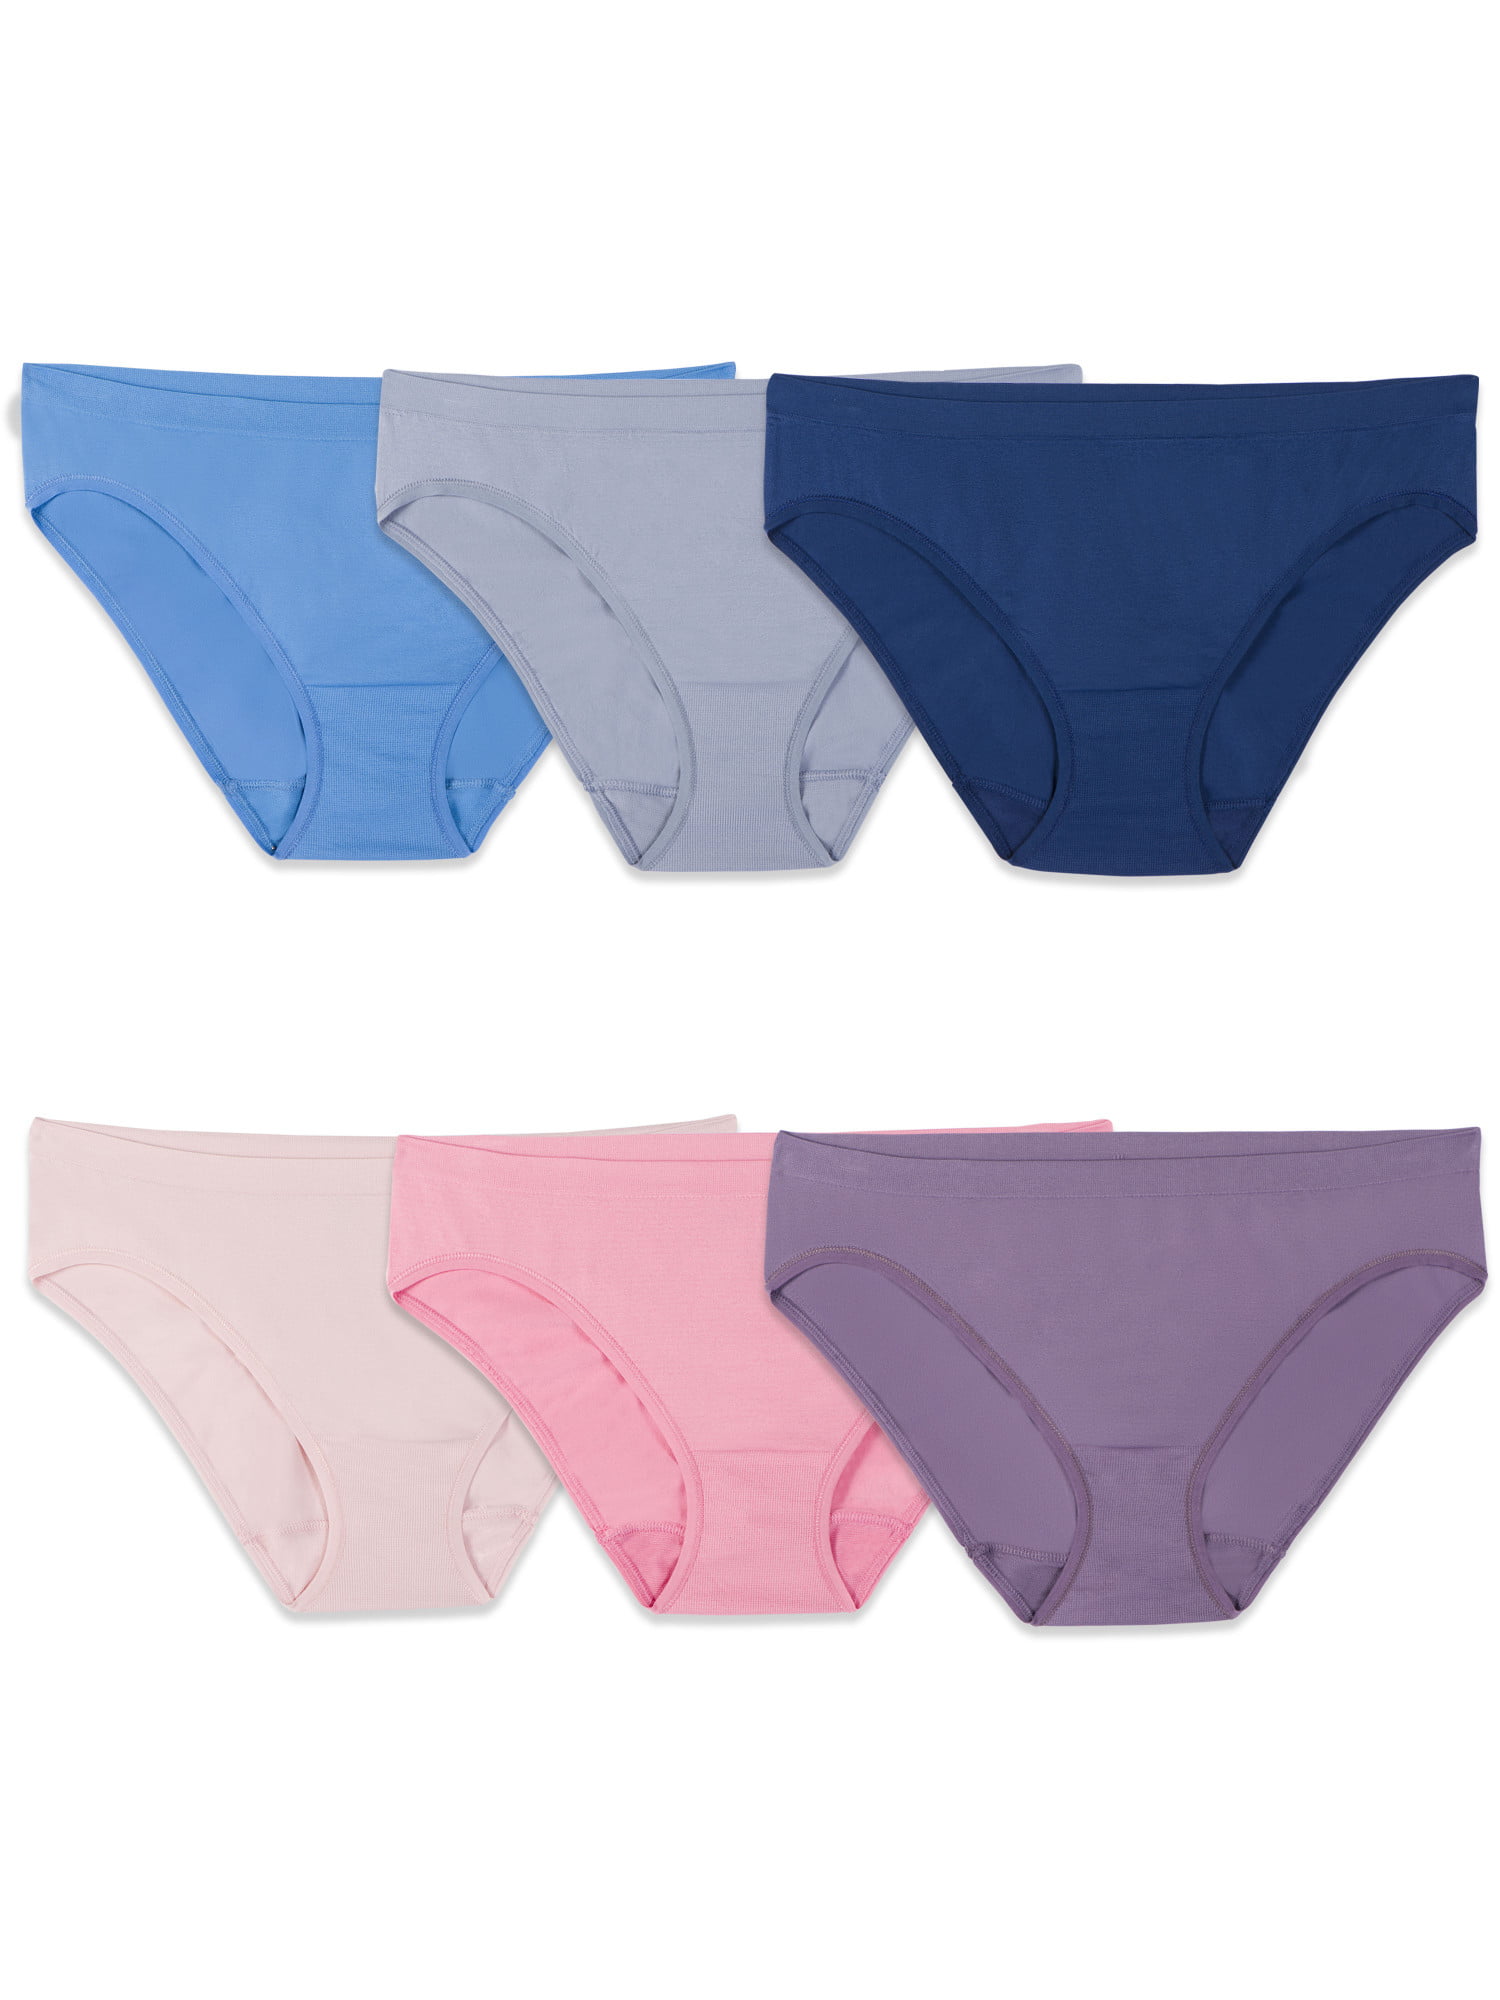 Fruit of the Loom Women's 360 Stretch Comfort Hipster Underwear, 6 Pack